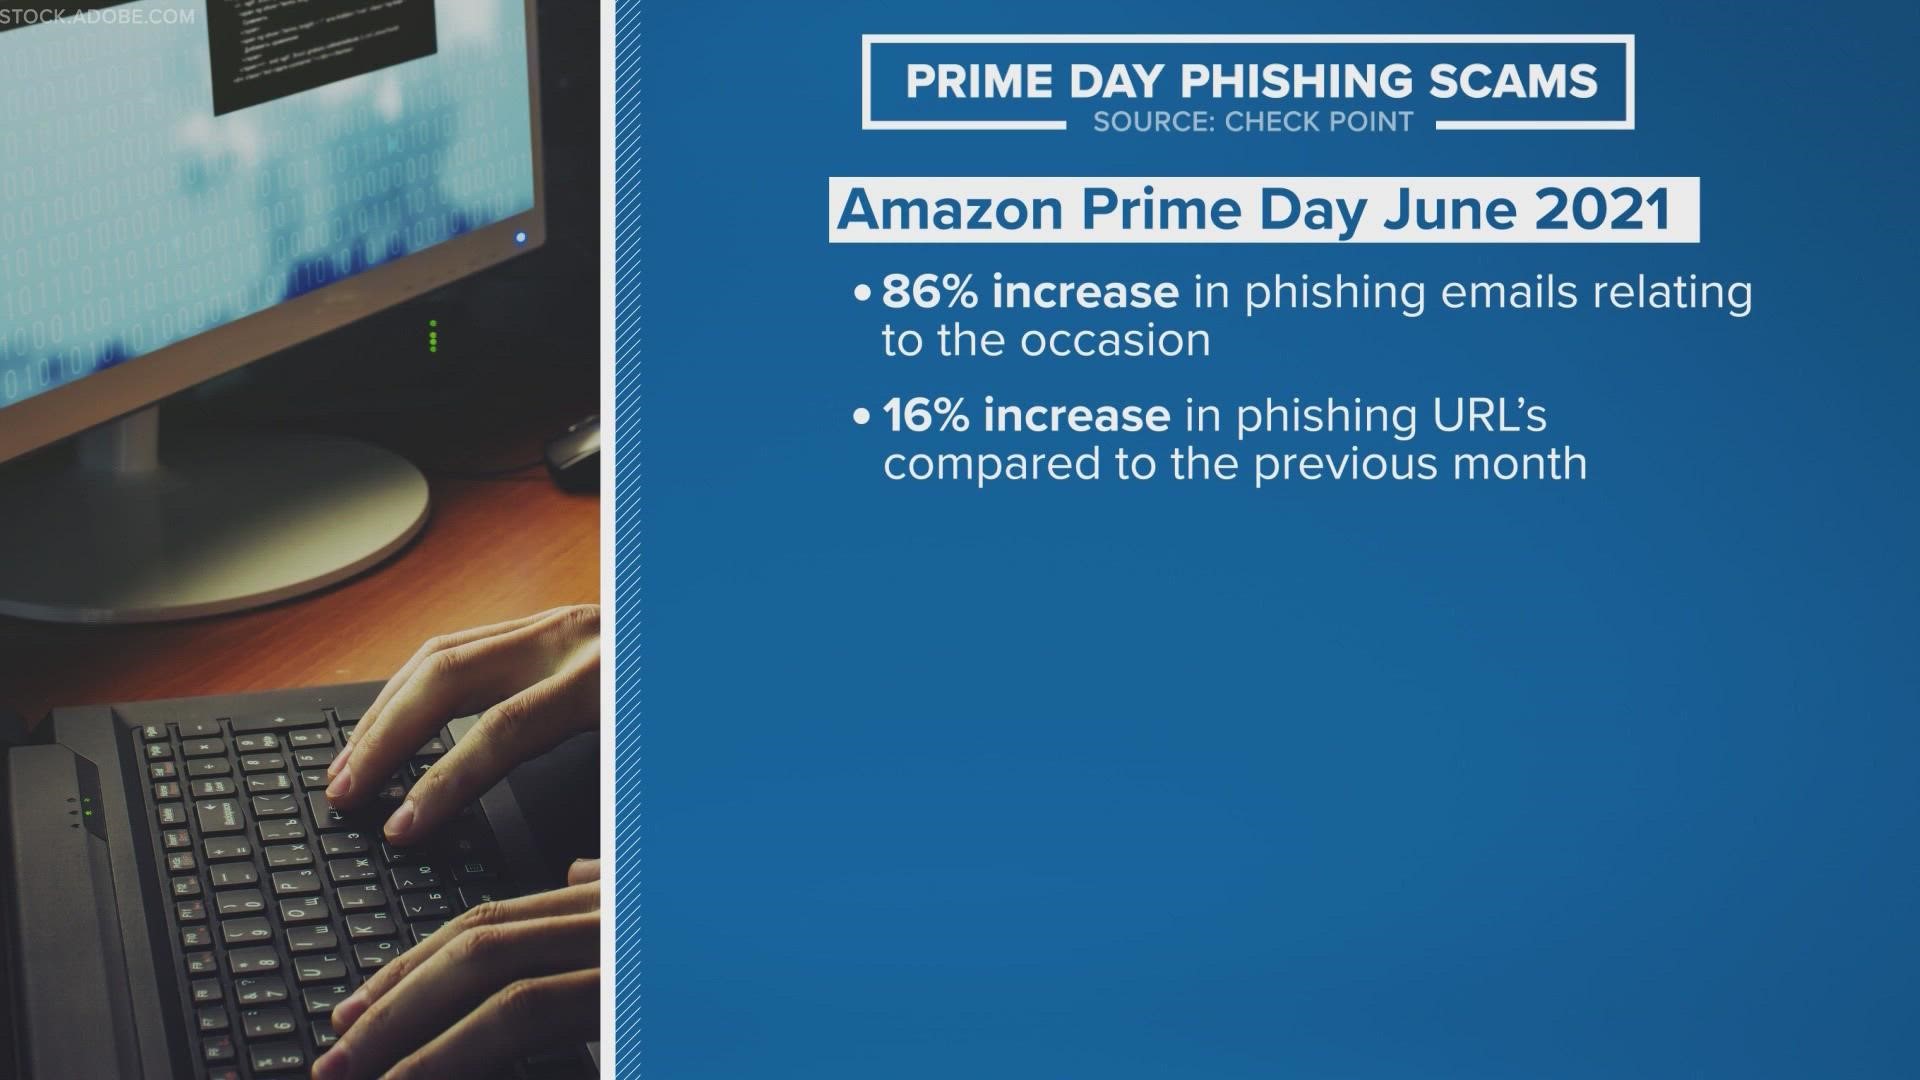 Check out these photos of actual scams folks are seeing on Amazon Prime Day.